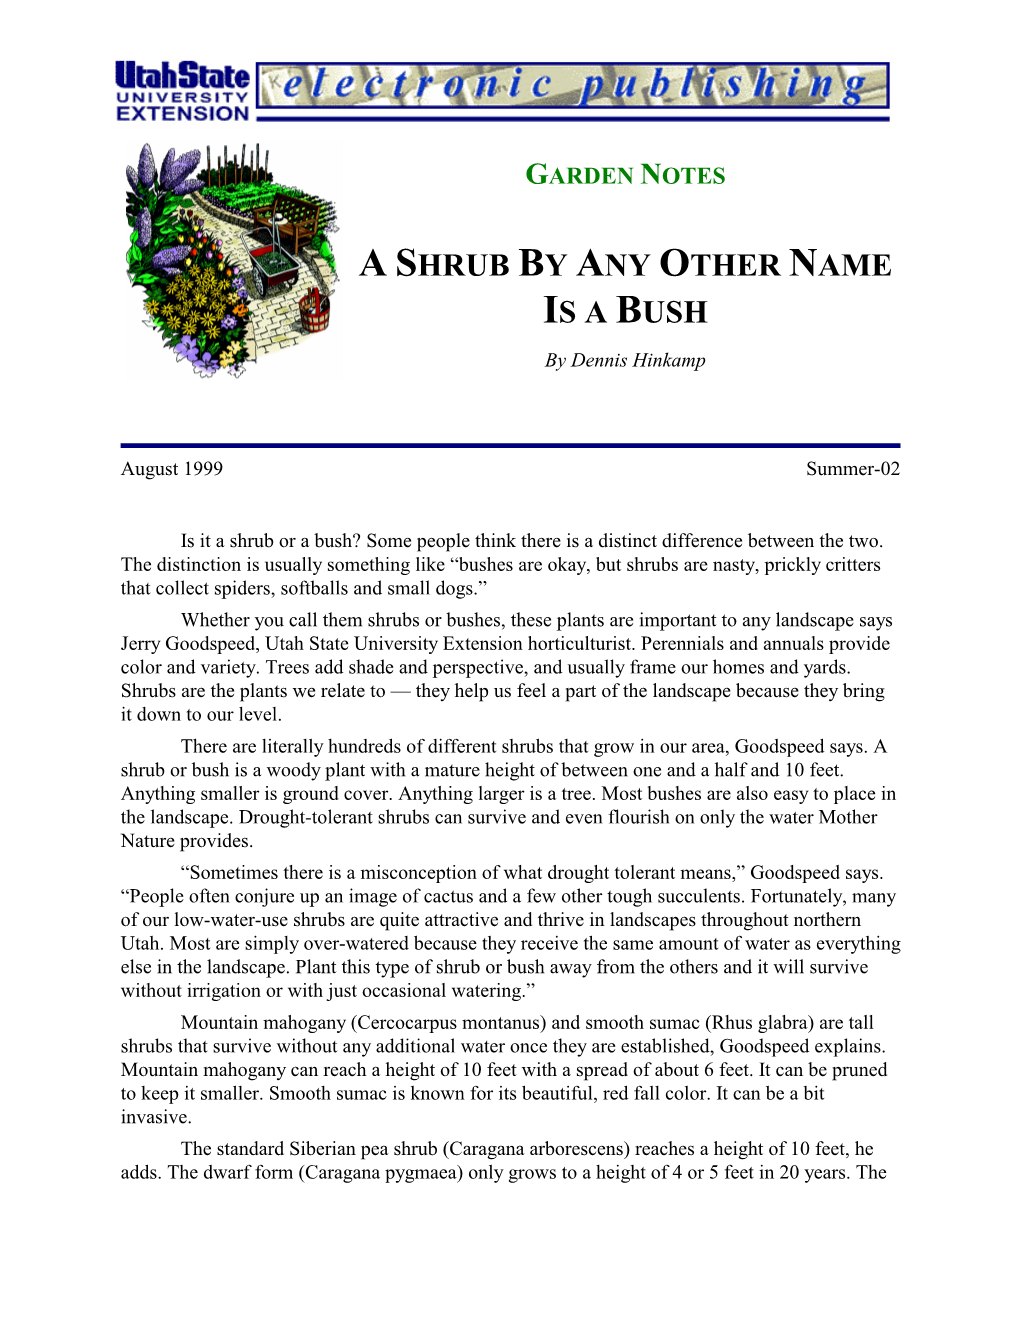 A SHRUB by ANY OTHER NAME IS a BUSH by Dennis Hinkamp